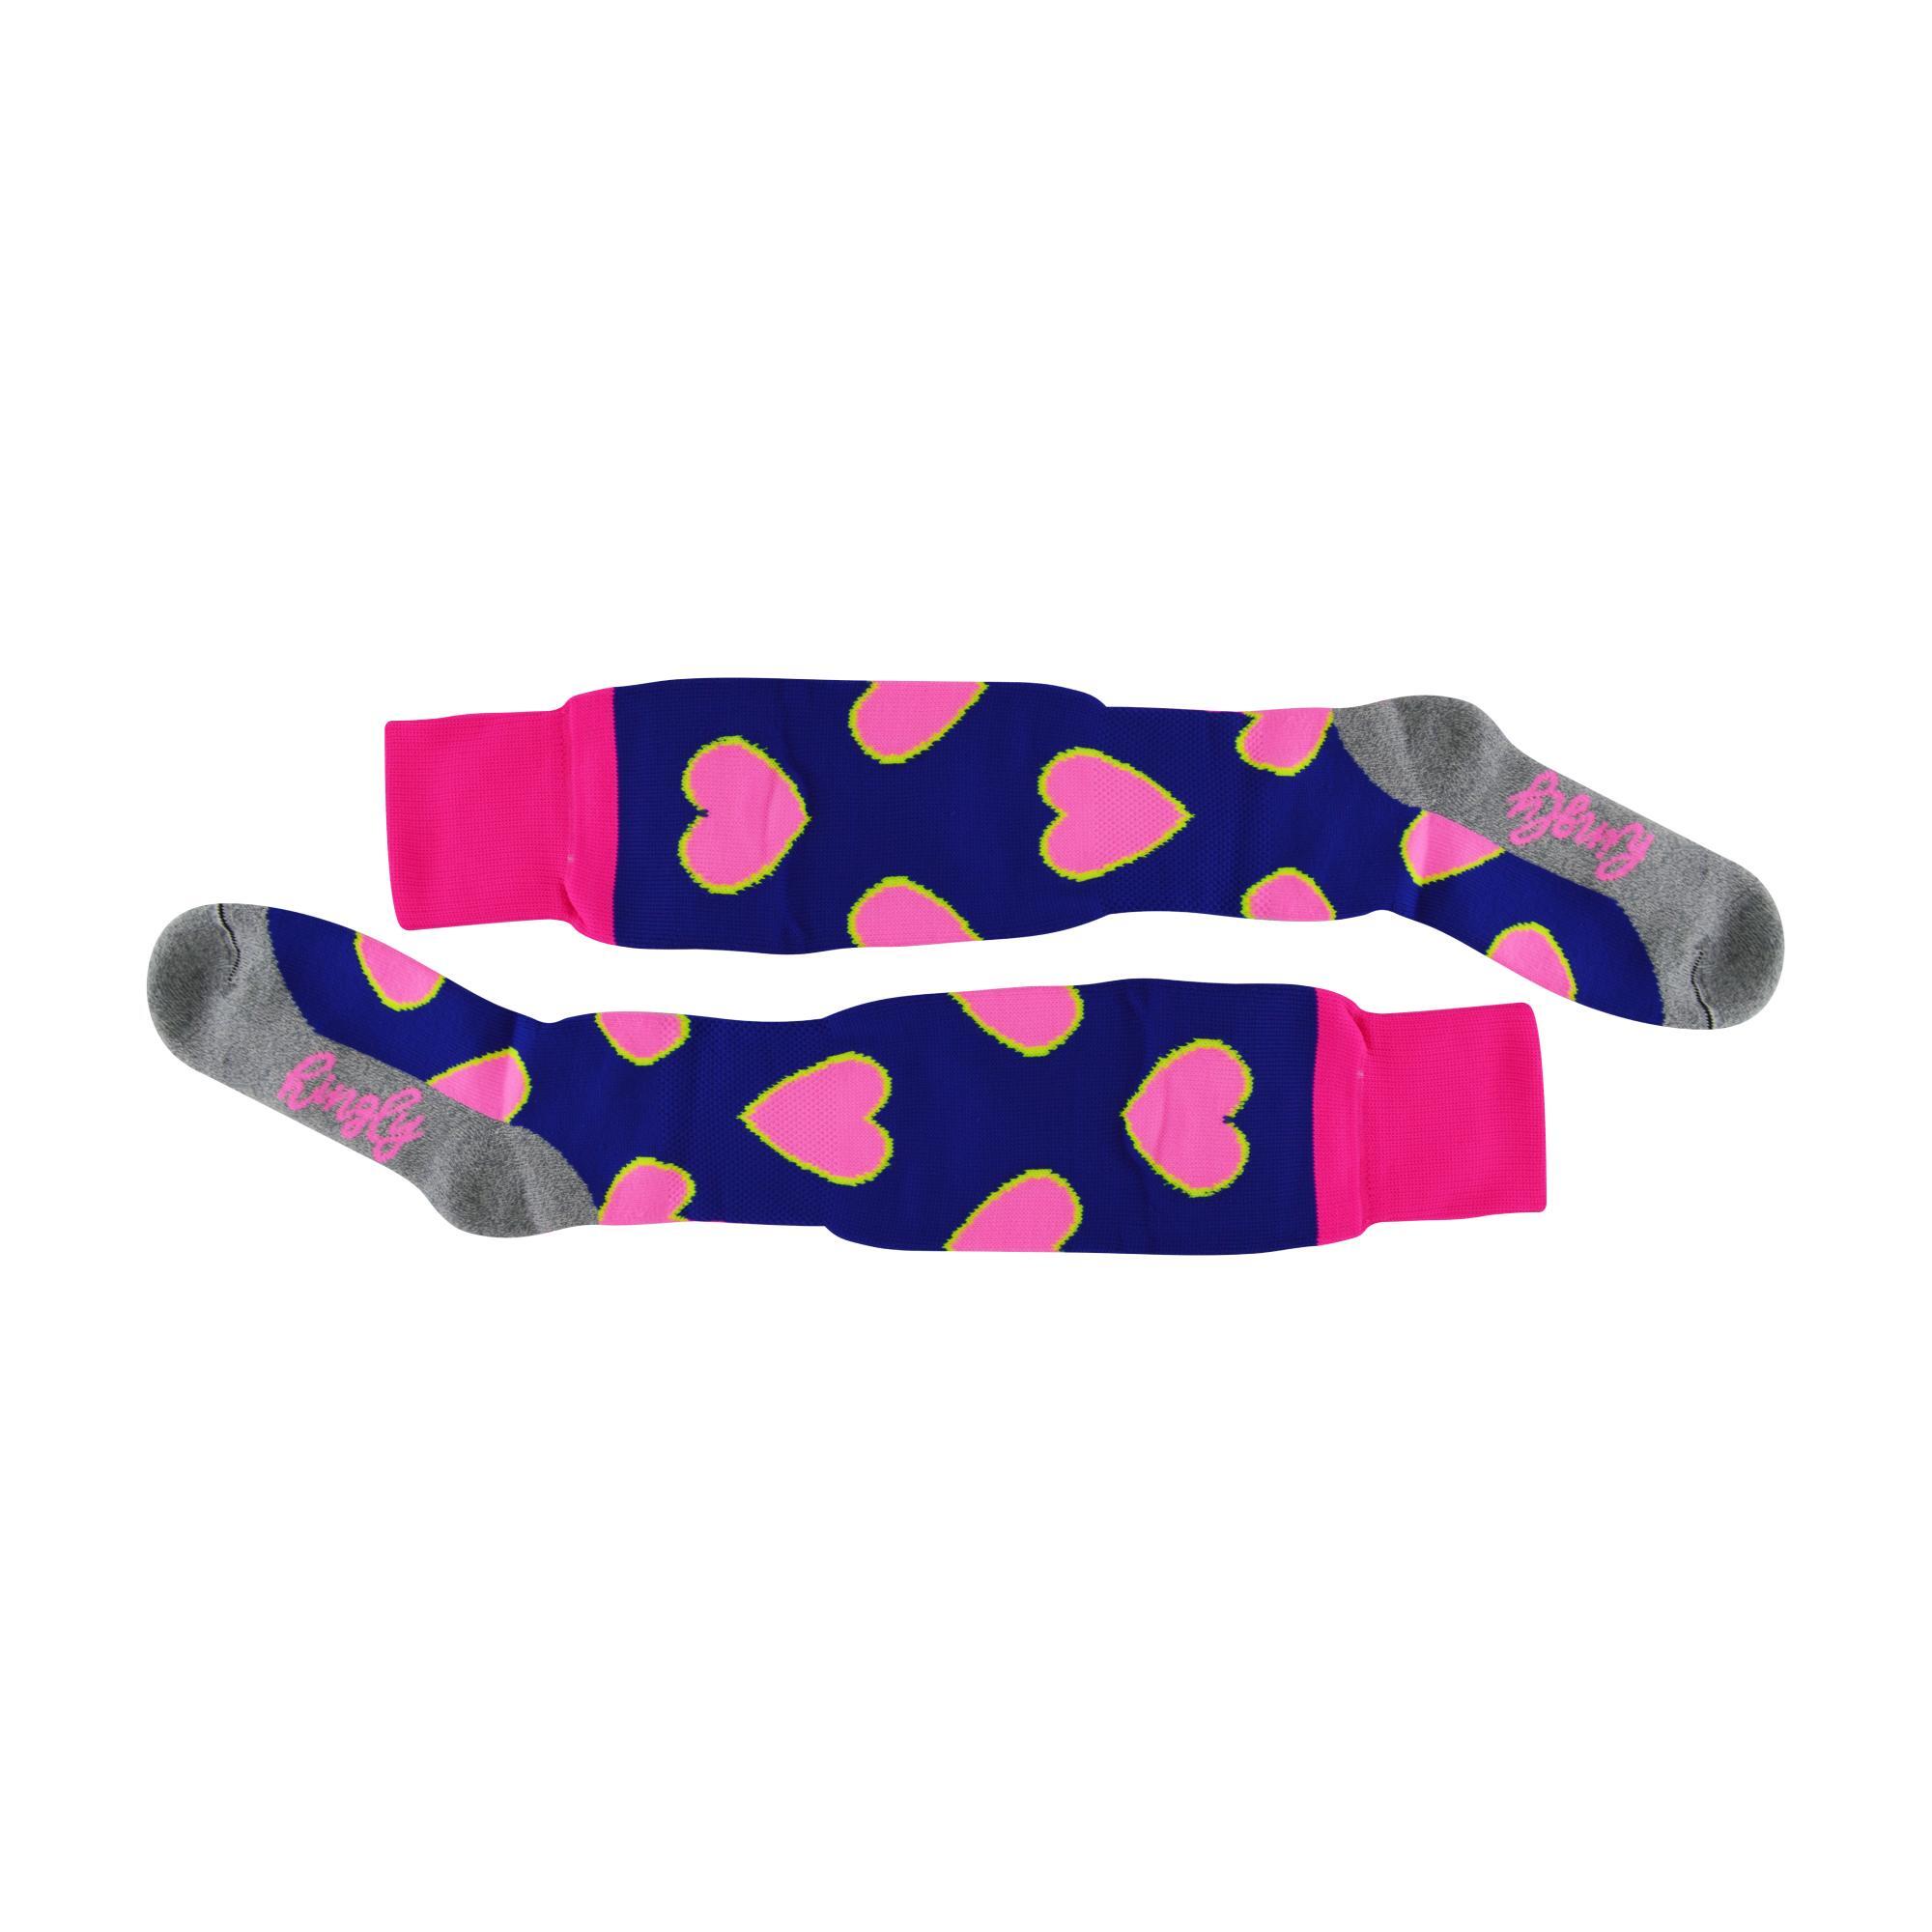 Knee High Hockey Socks with Funky Fun Patterns | Adult Sizes 2/4